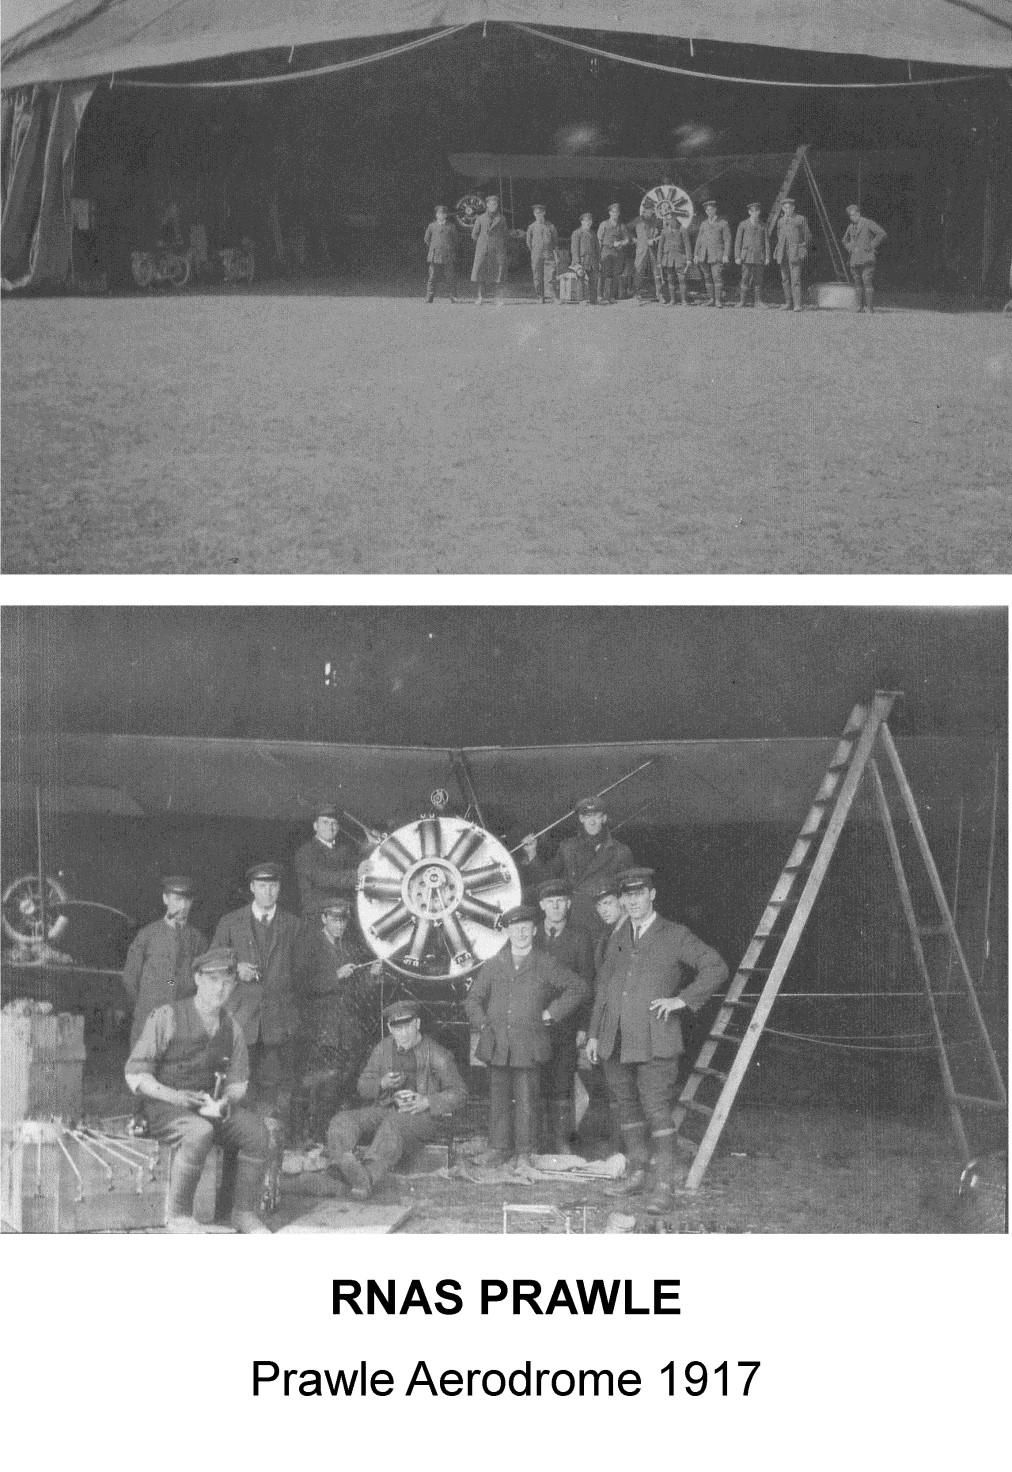 When, in April 1918, the airfield re-opened as RAF Prawle, the flights of DH6s and DH9s also suffered from a high